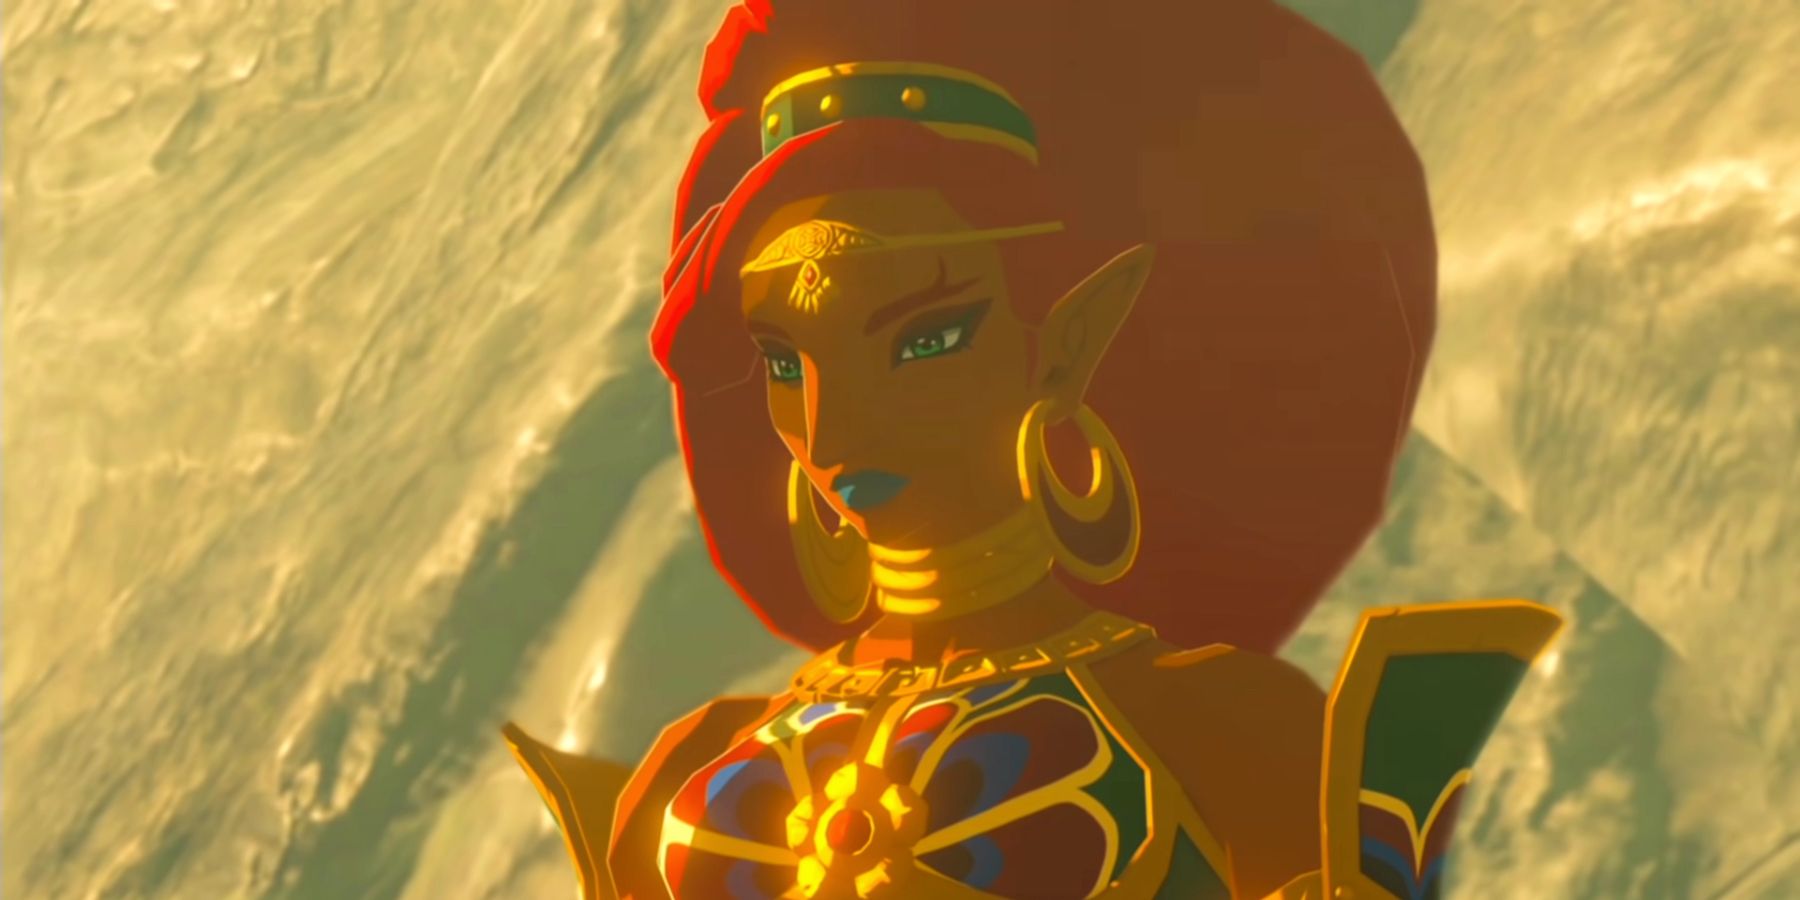 Gerudo Champion Urbosa from Breath of the Wild, seen standing in front of a stone cliff face in one of the game's Memories cutscenes.